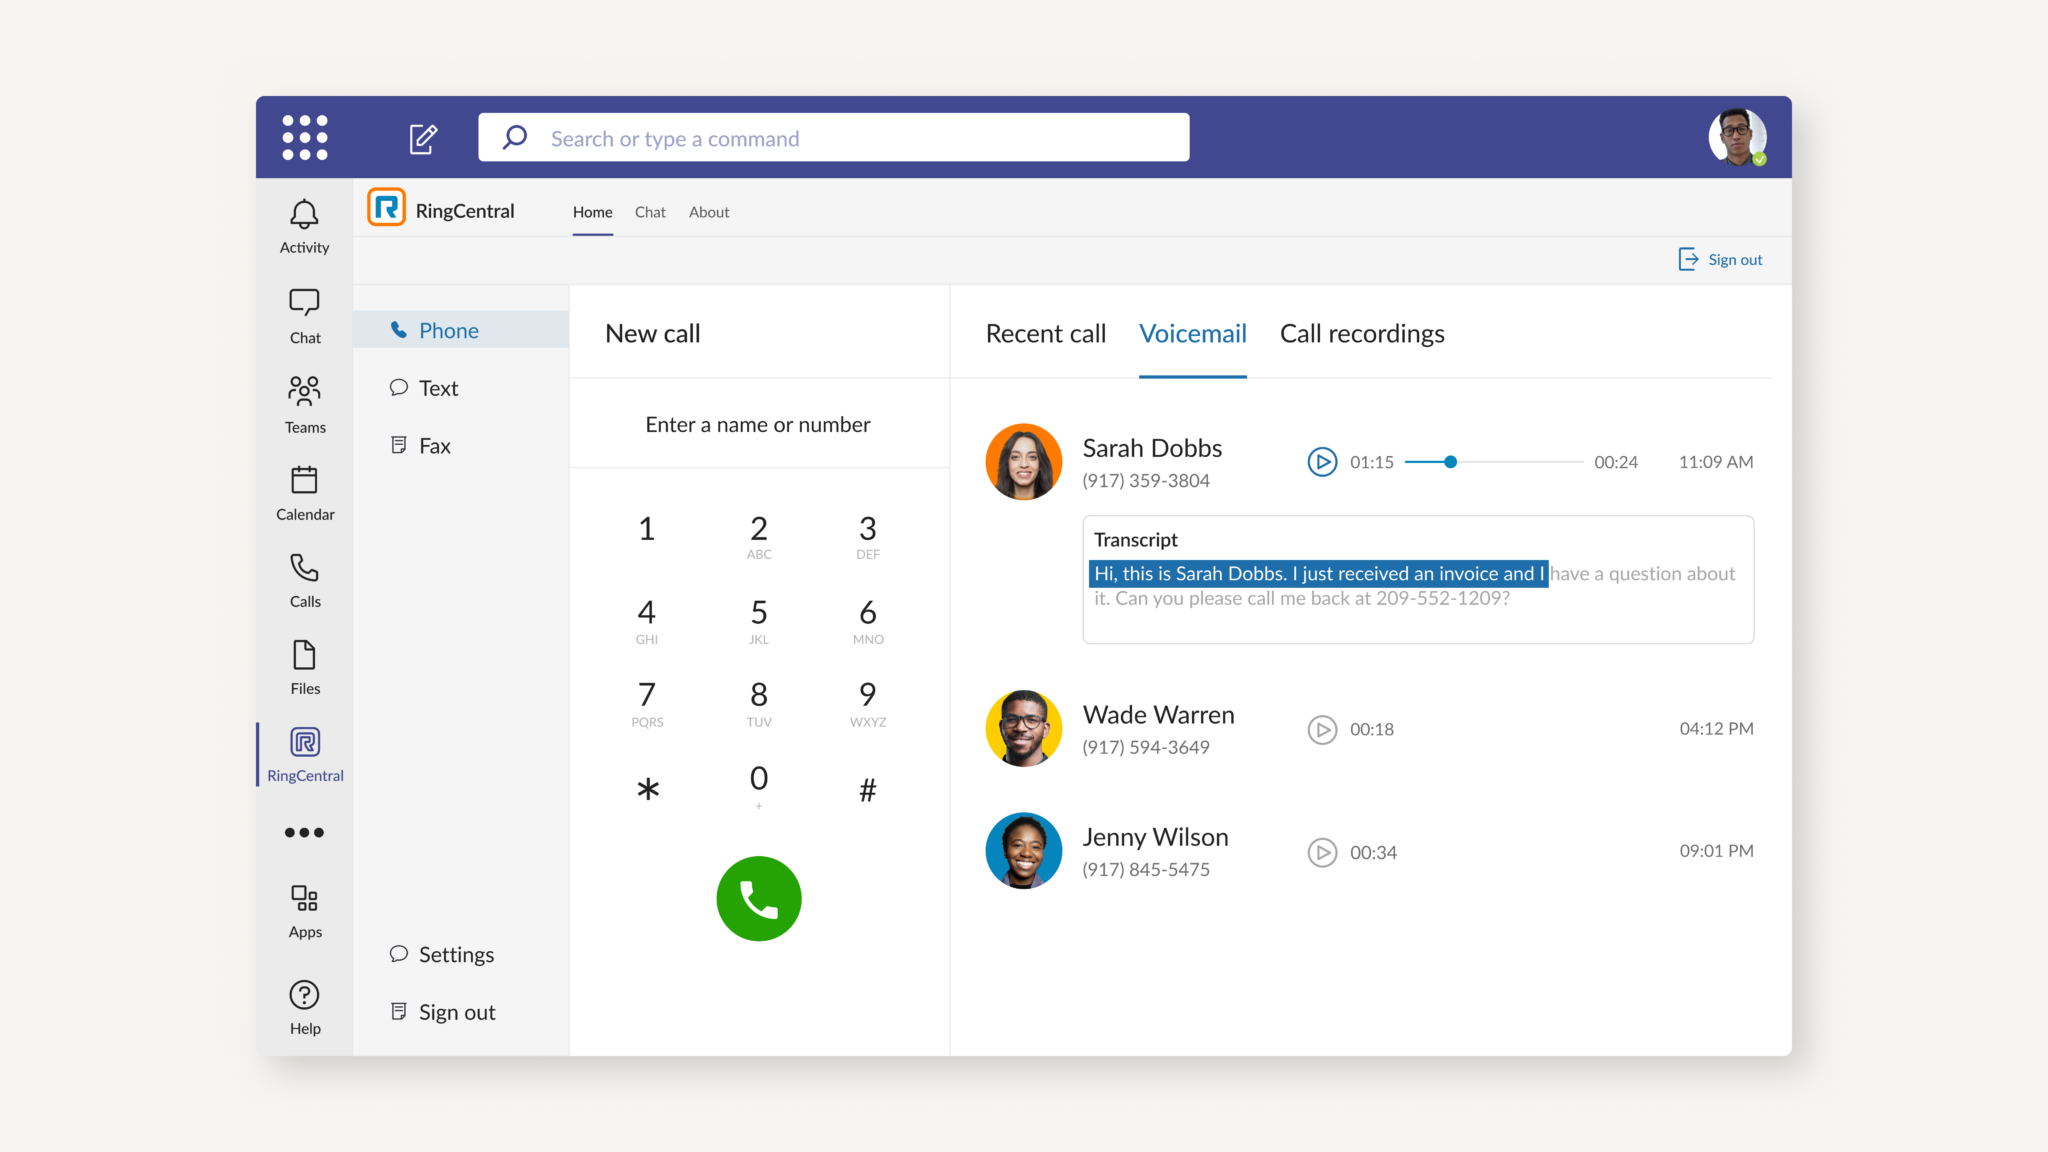 Microsoft Teams rolls out to Office 365 customers worldwide